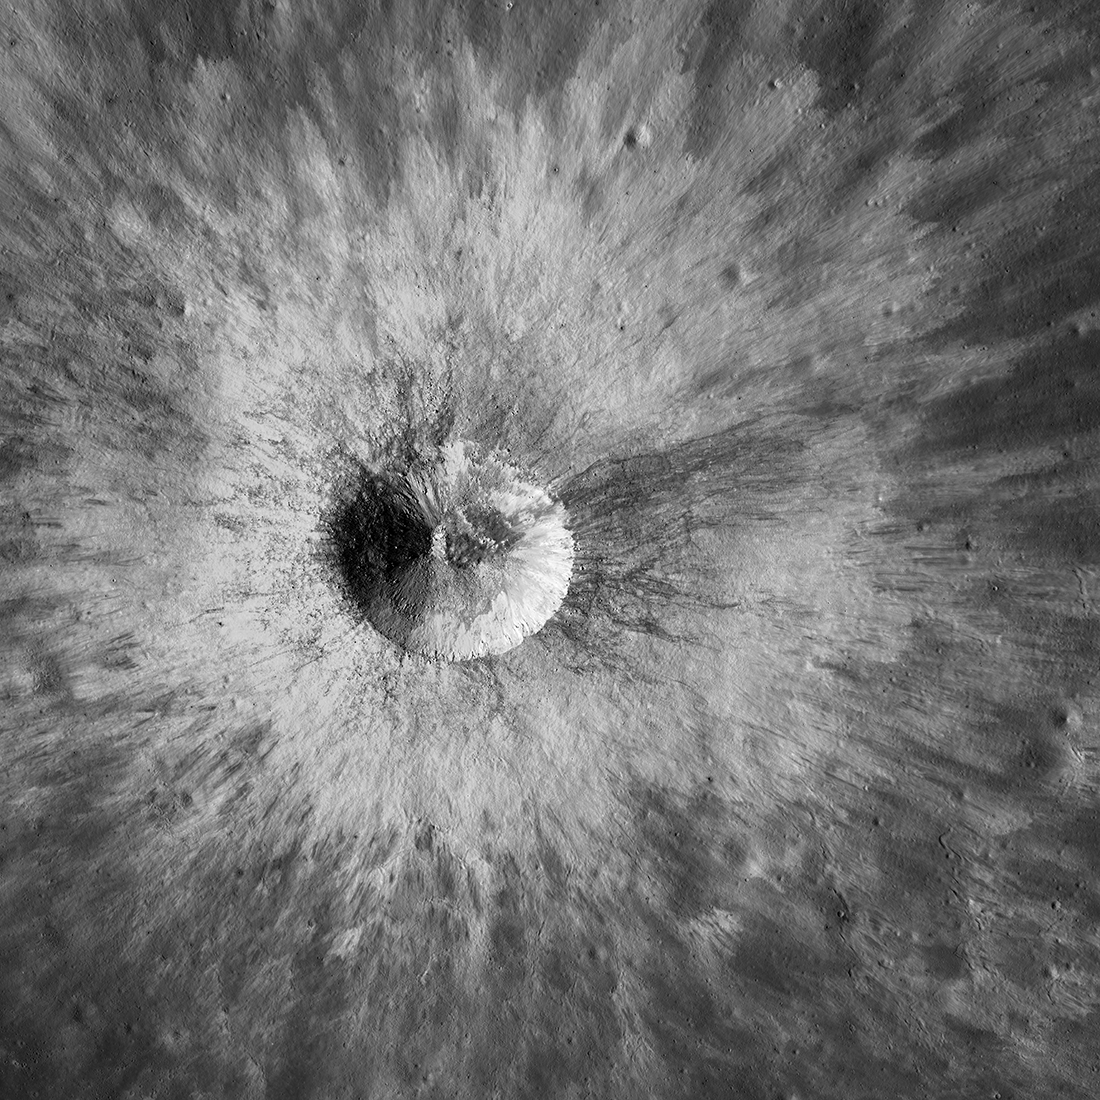 A bright young crater.